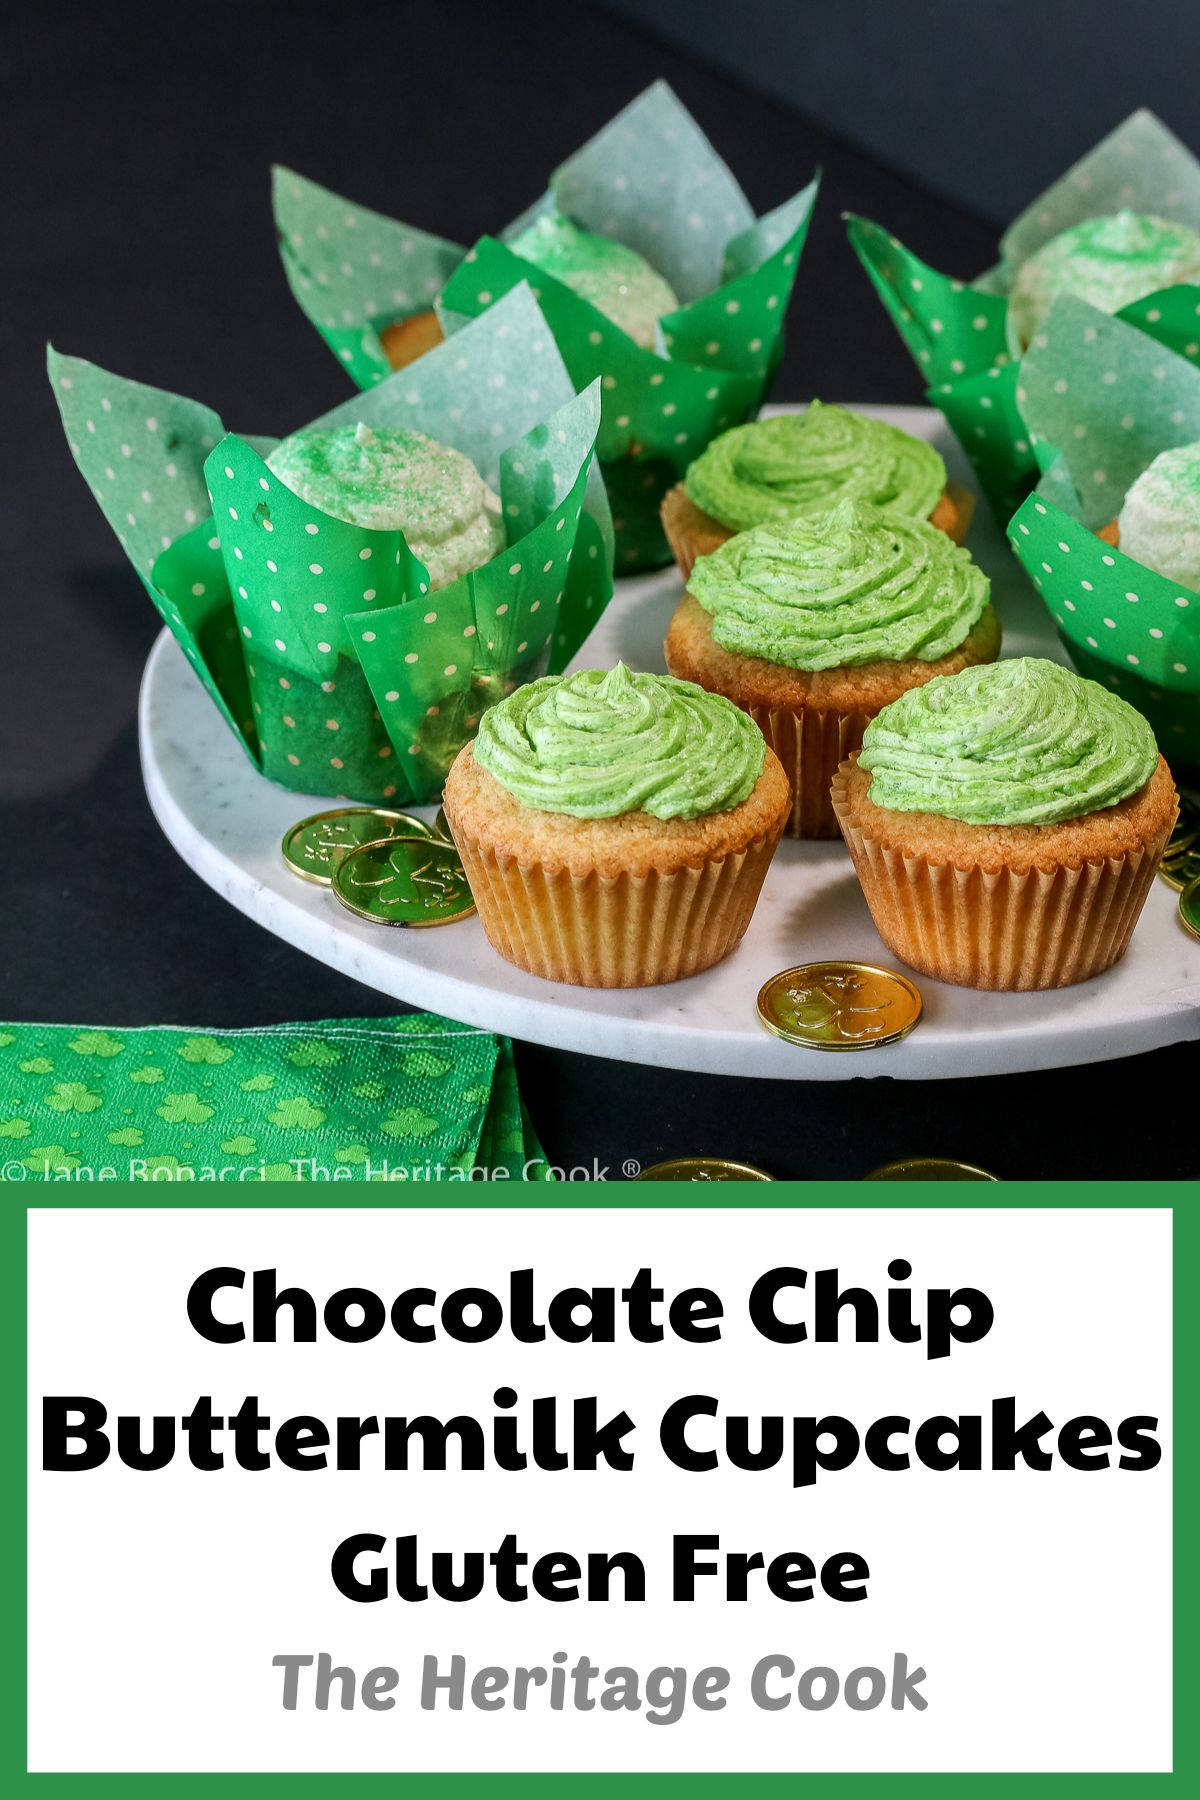 Vanilla cupcakes in festive cupcake papers, some with green frosting and some with white and green sugar sprinkles; Festive luscious chocolate chip buttermilk cupcakes with a surprise inside, perfect for any holiday © 2023 Jane Bonacci, The Heritage Cook. 